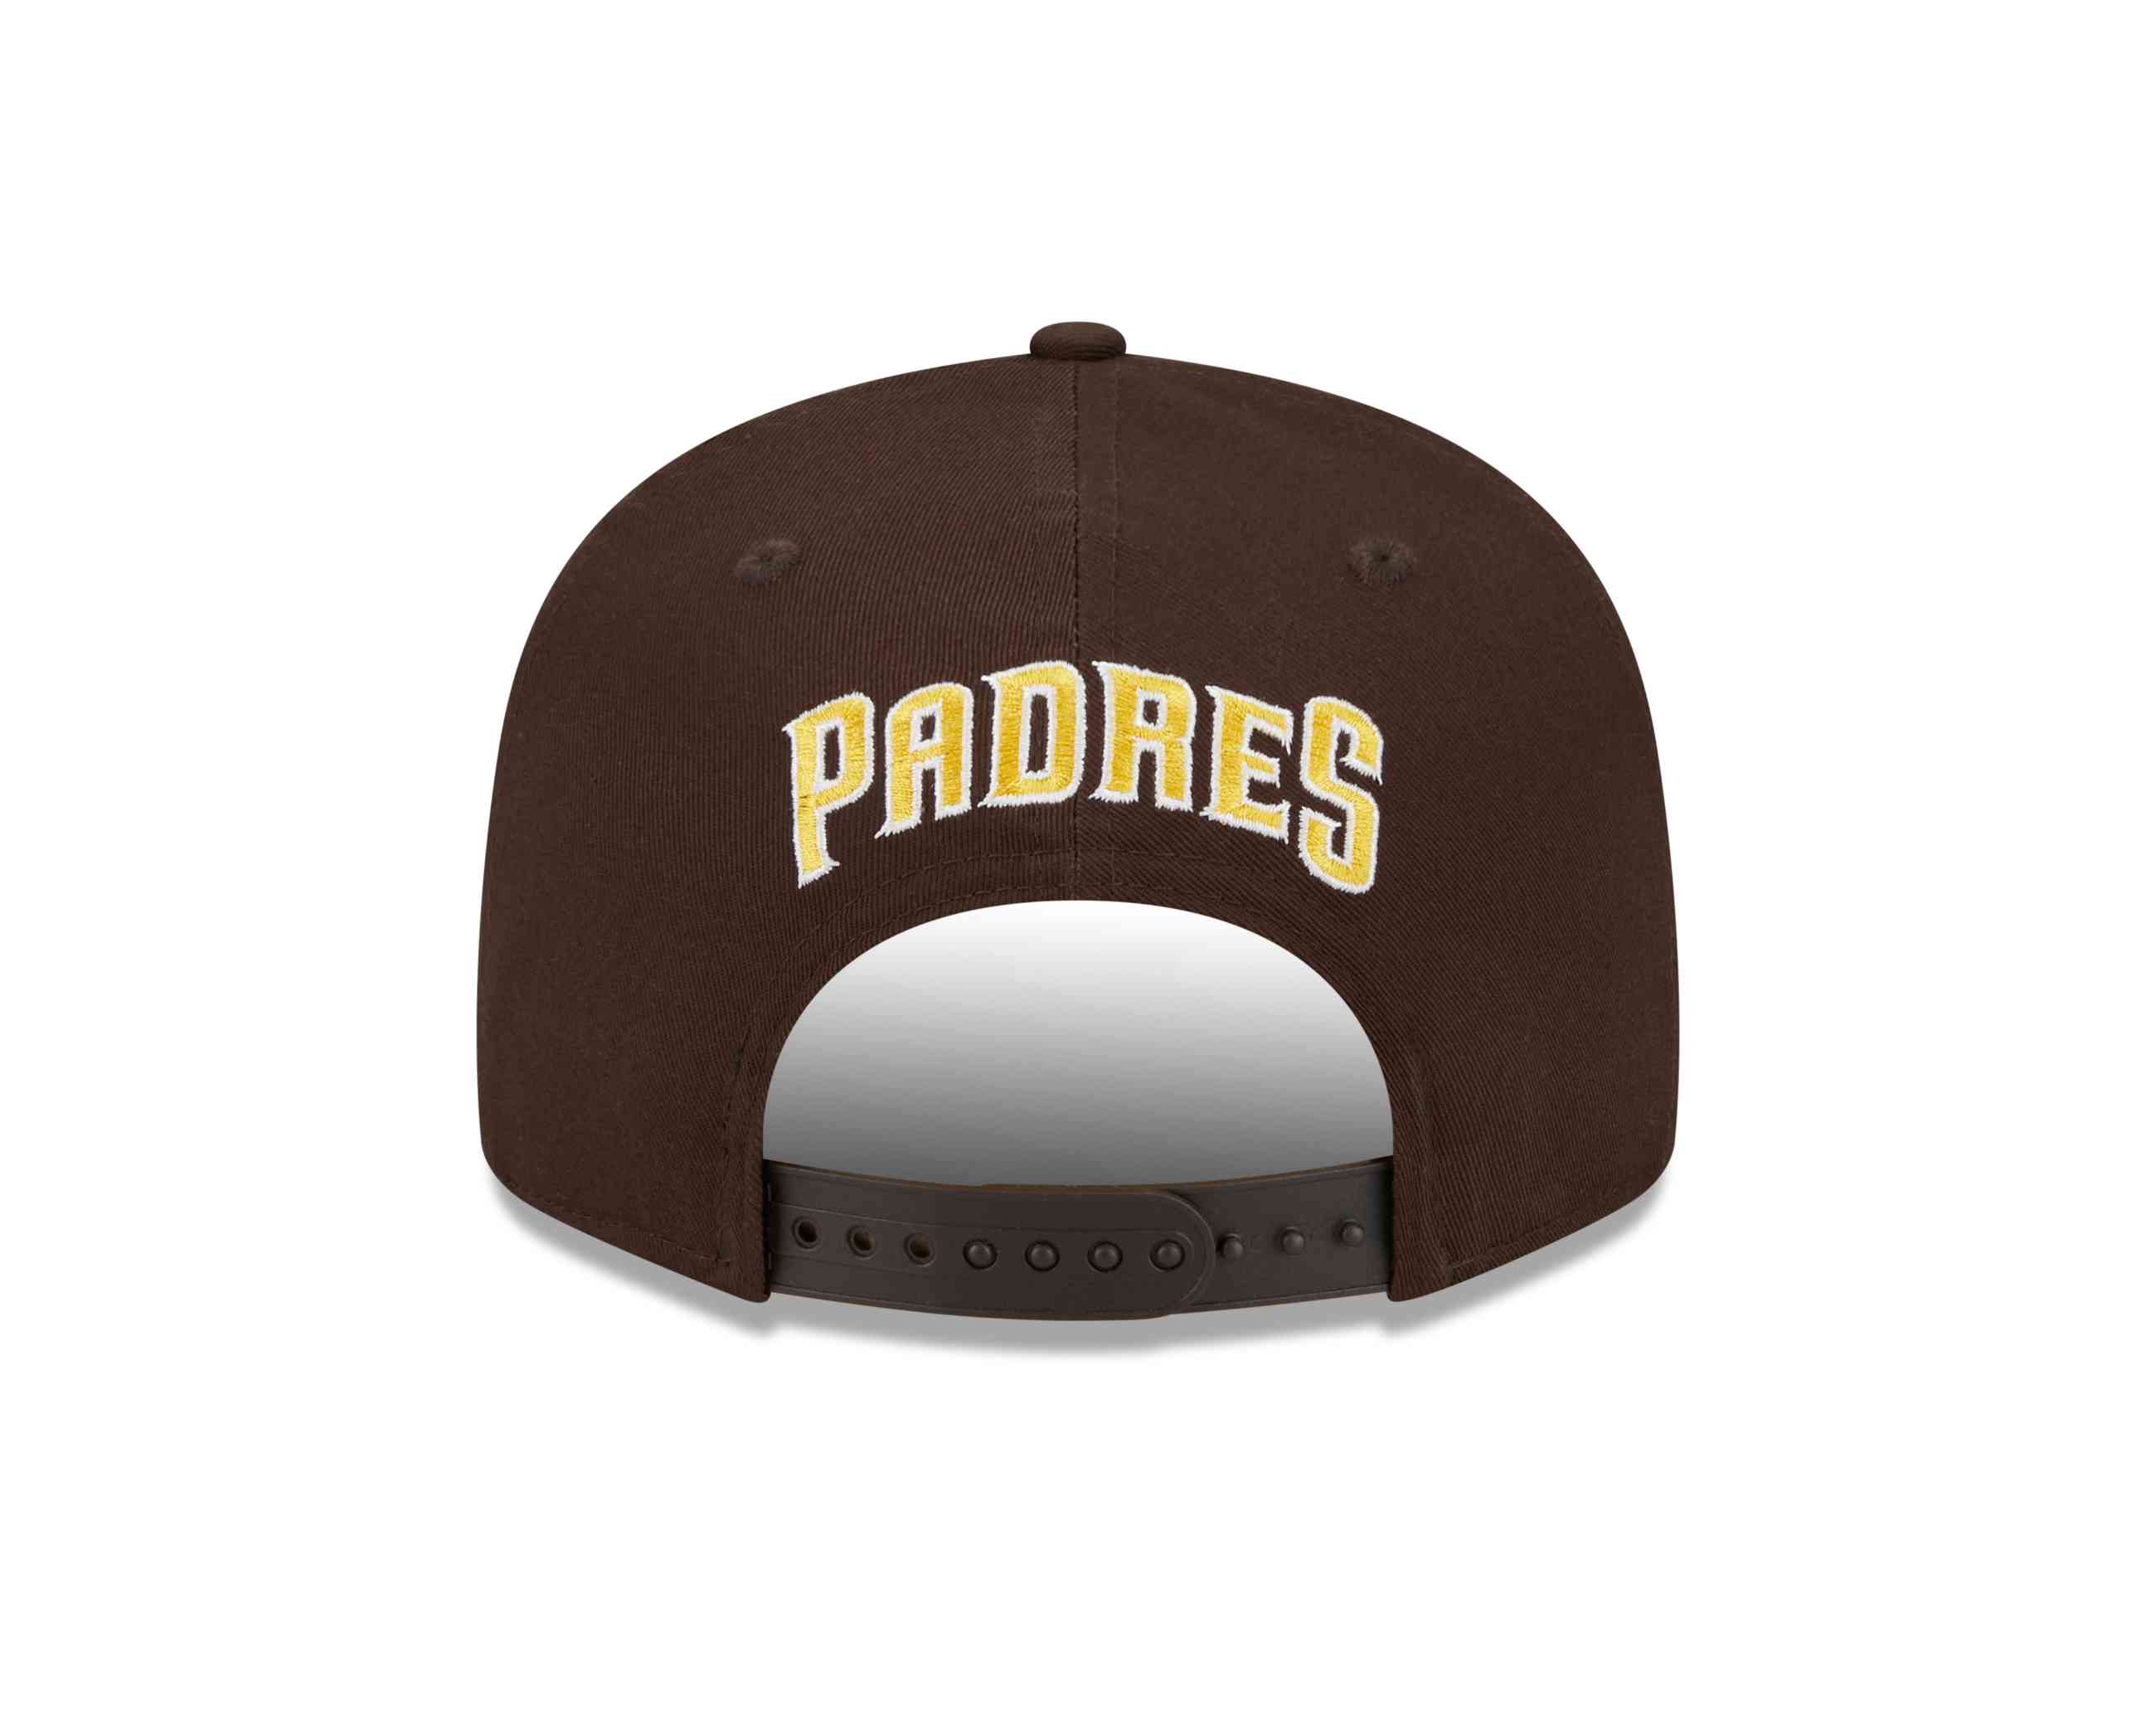 New Era - MLB San Diego Padres Side Patch 9Fifty Snapback Cap